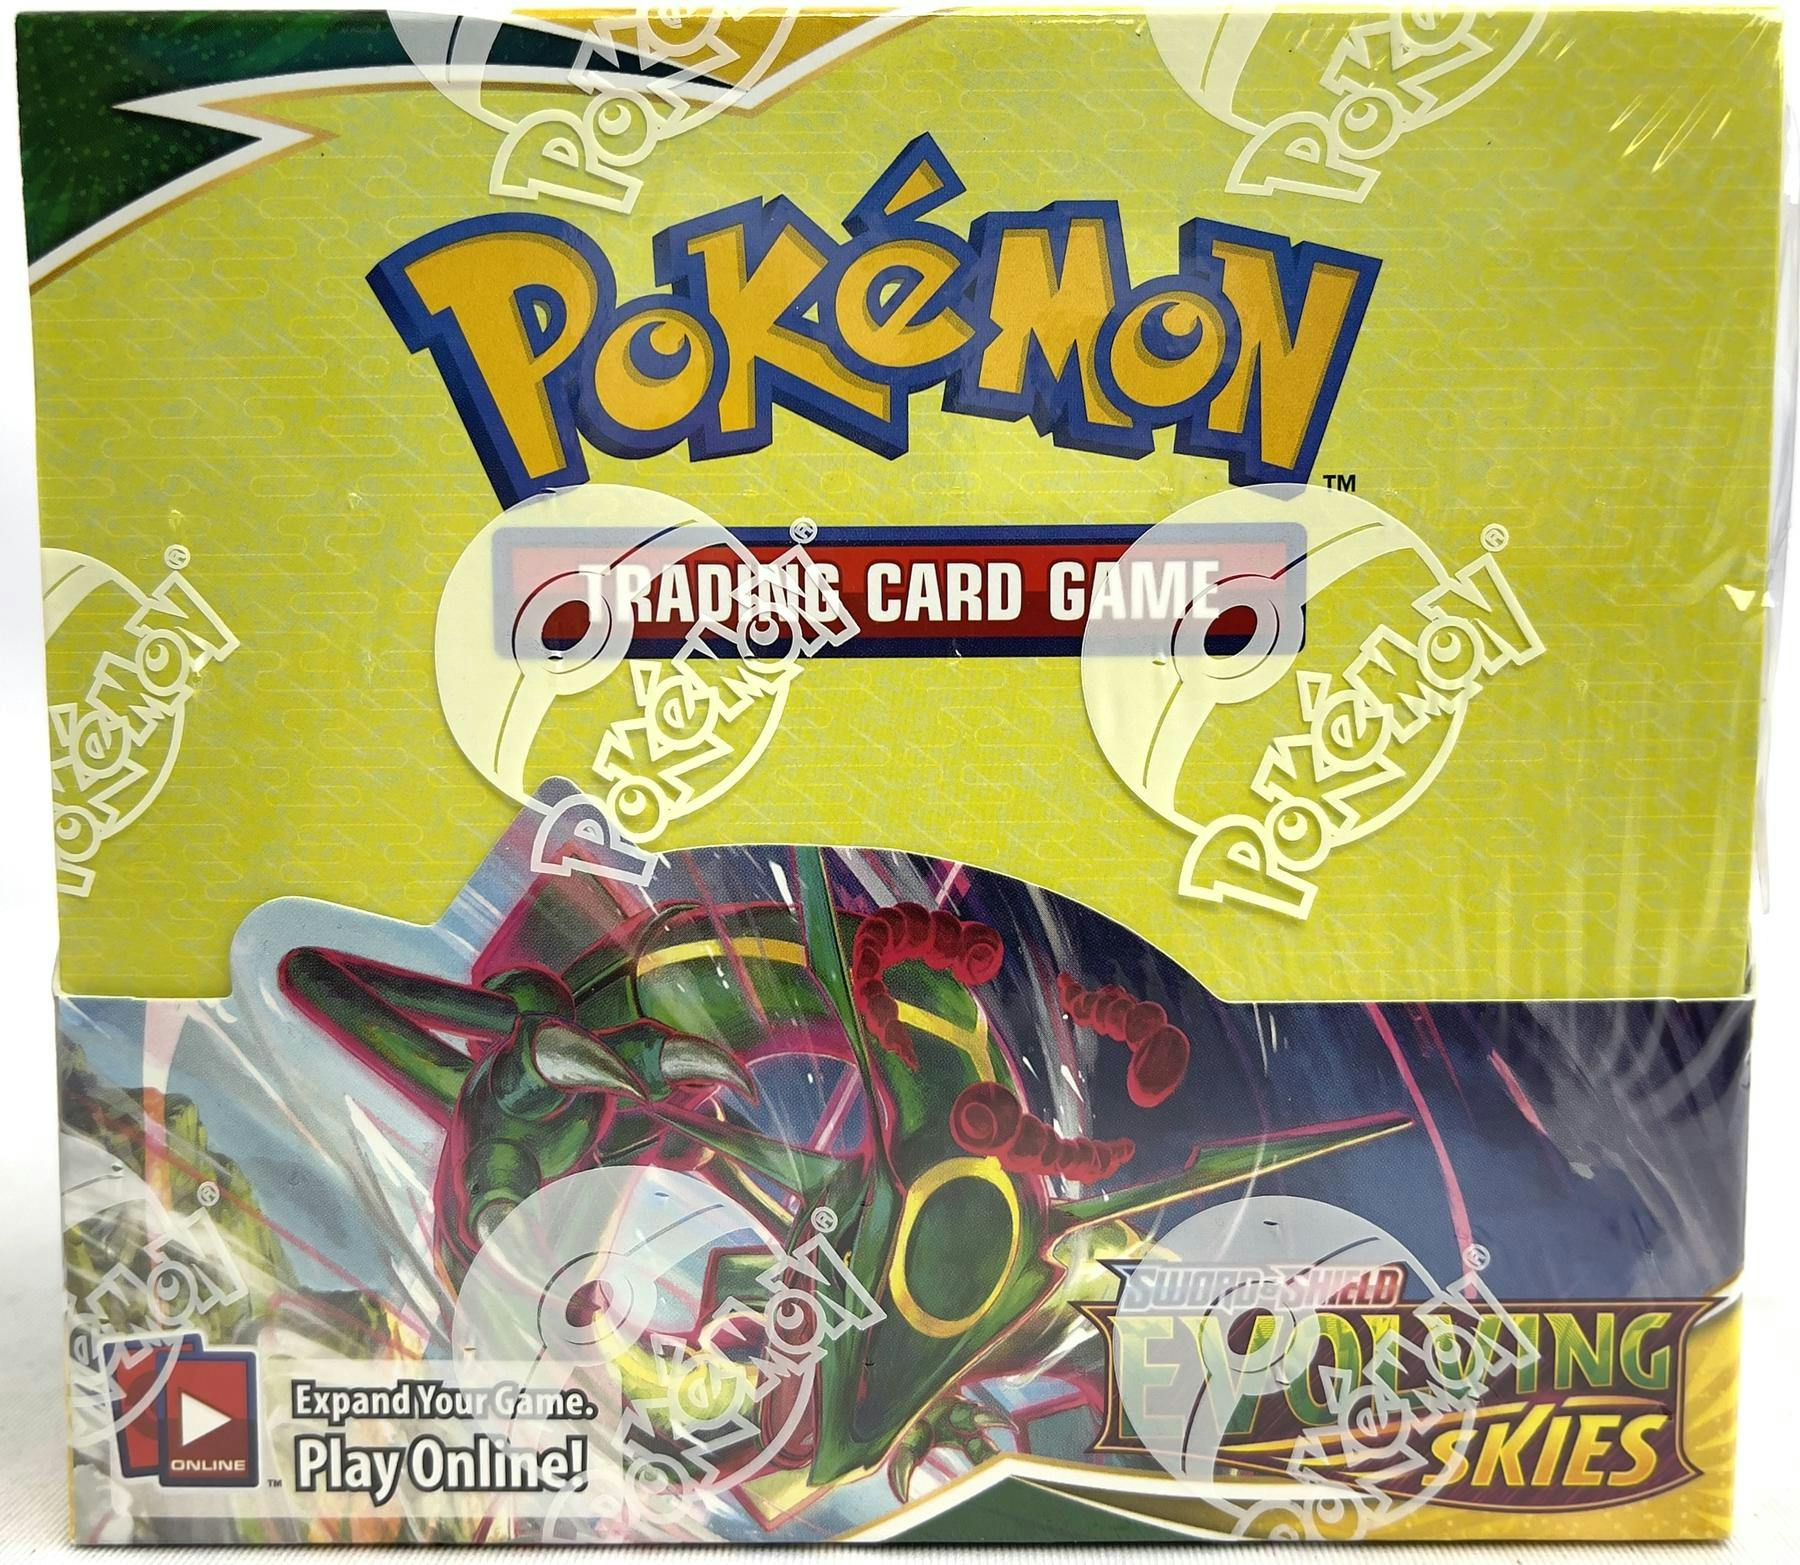 Evolving Skies Booster Box In Stock Availability and Price Tracking